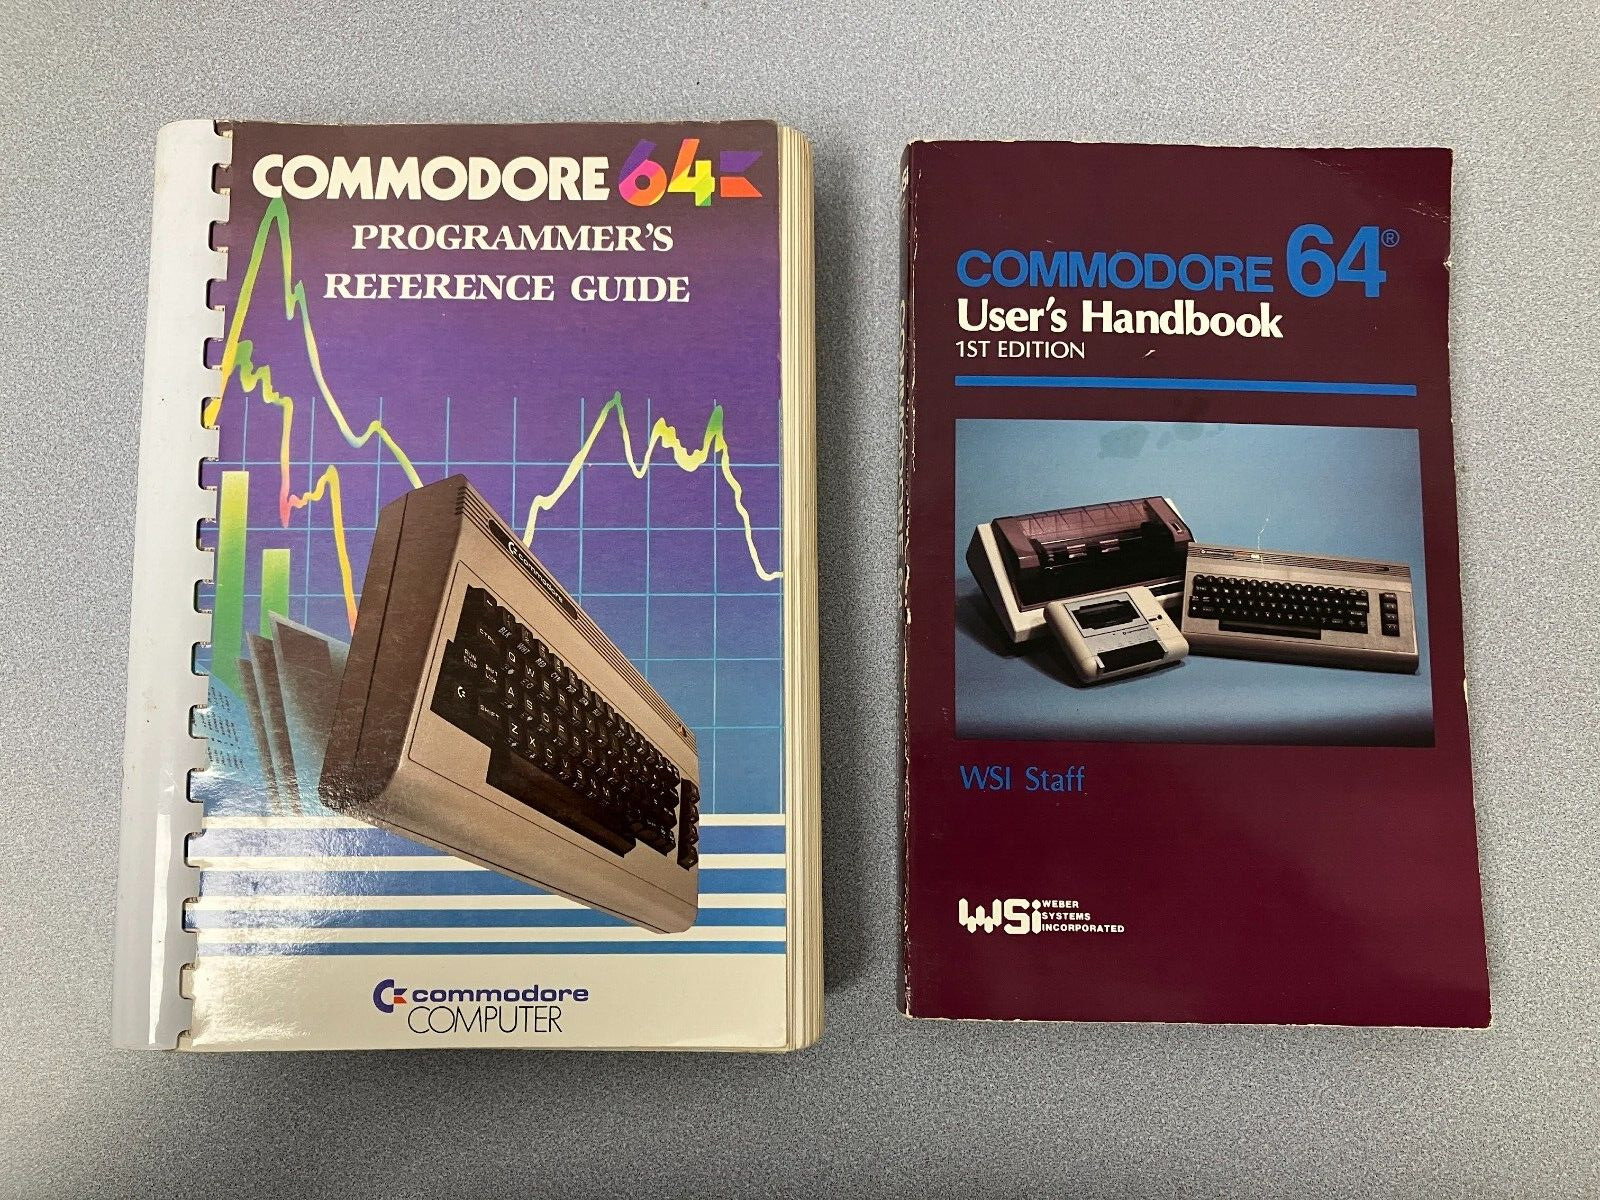 Commodore 64 Programmer's Reference Guide and User's Handbook Vintage Manuals